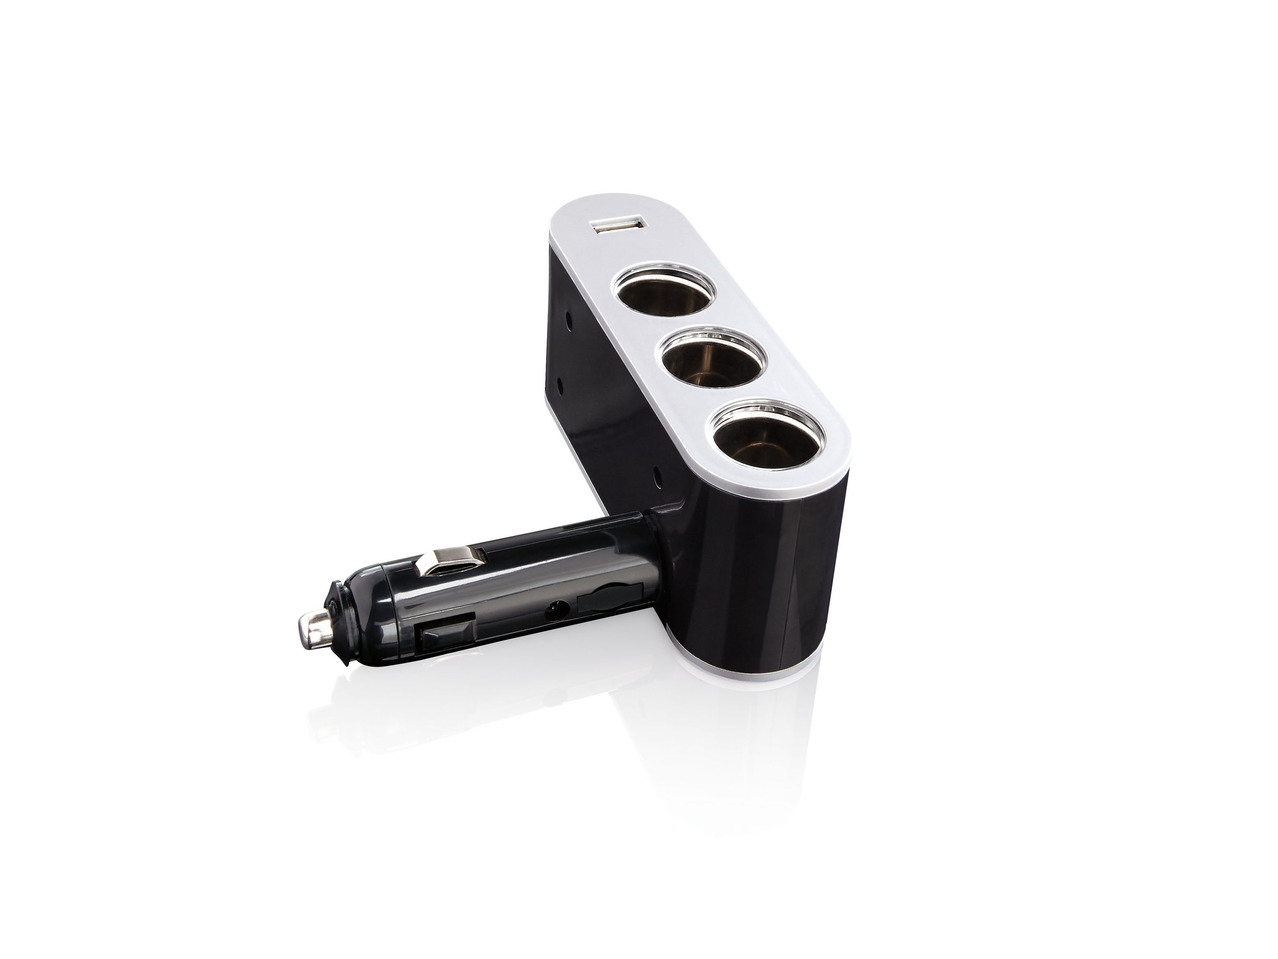 3-Way Car Splitter Adaptor or In-Car USB Charger, 12/24V